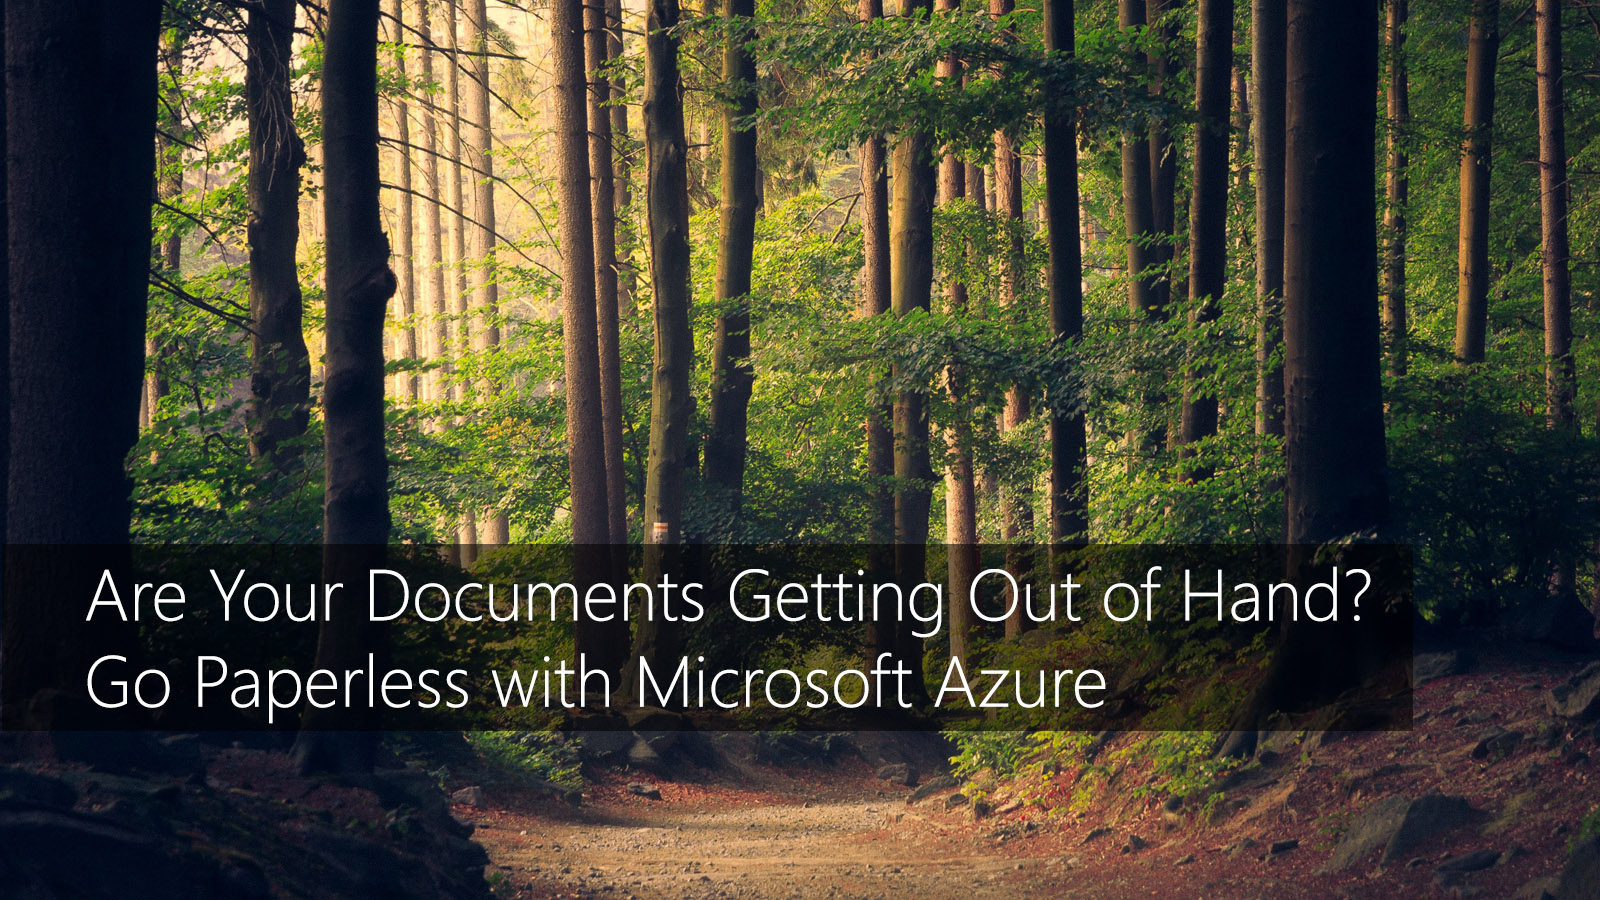 TMC-blog-are-your-documents-getting-out-out-of-hand-go-paperless-with-azure